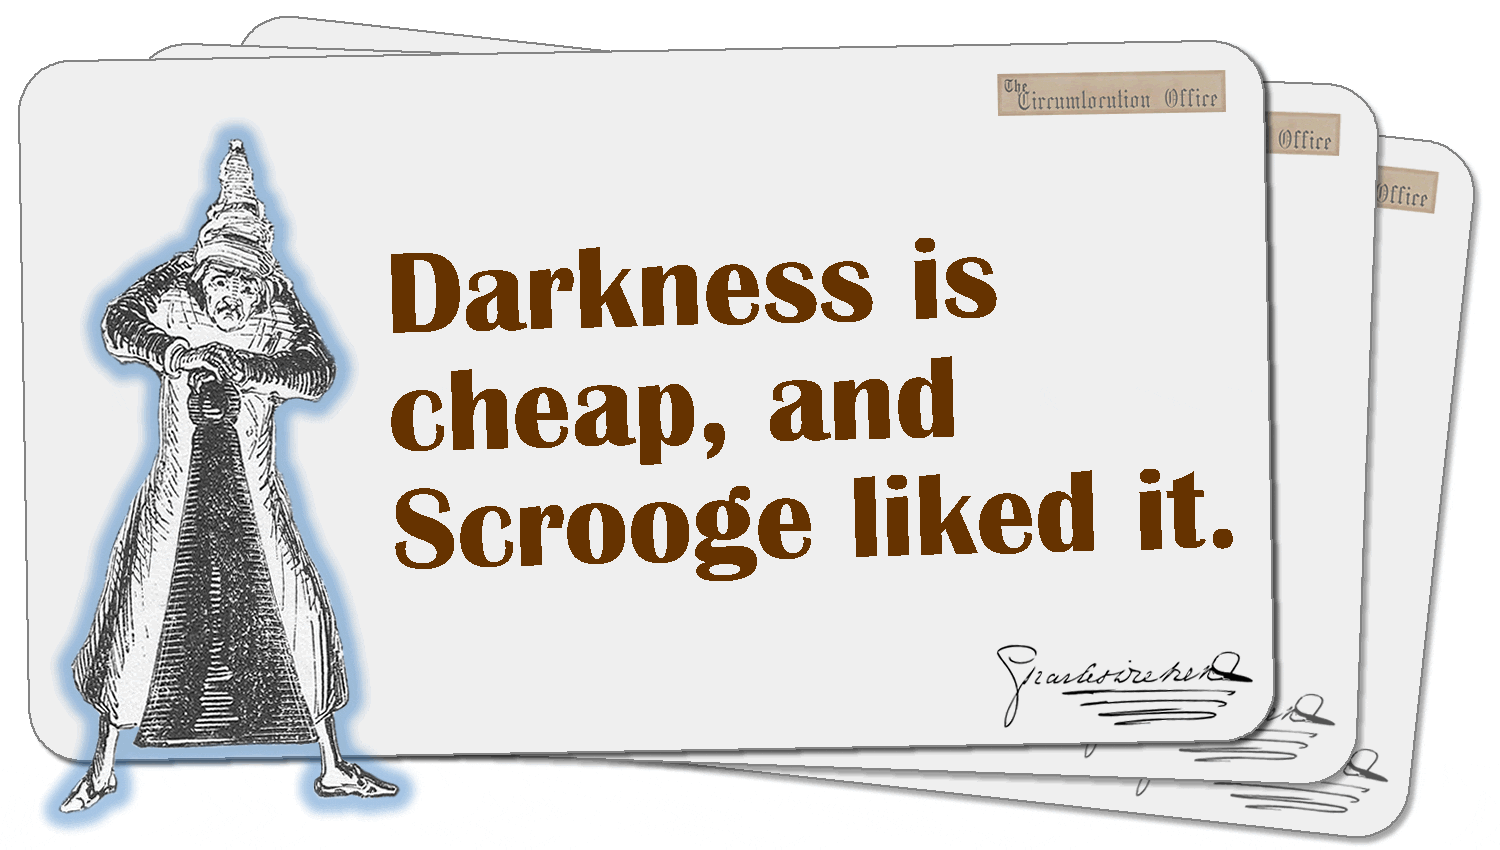 Darkness is cheap, and Scrooge liked it.